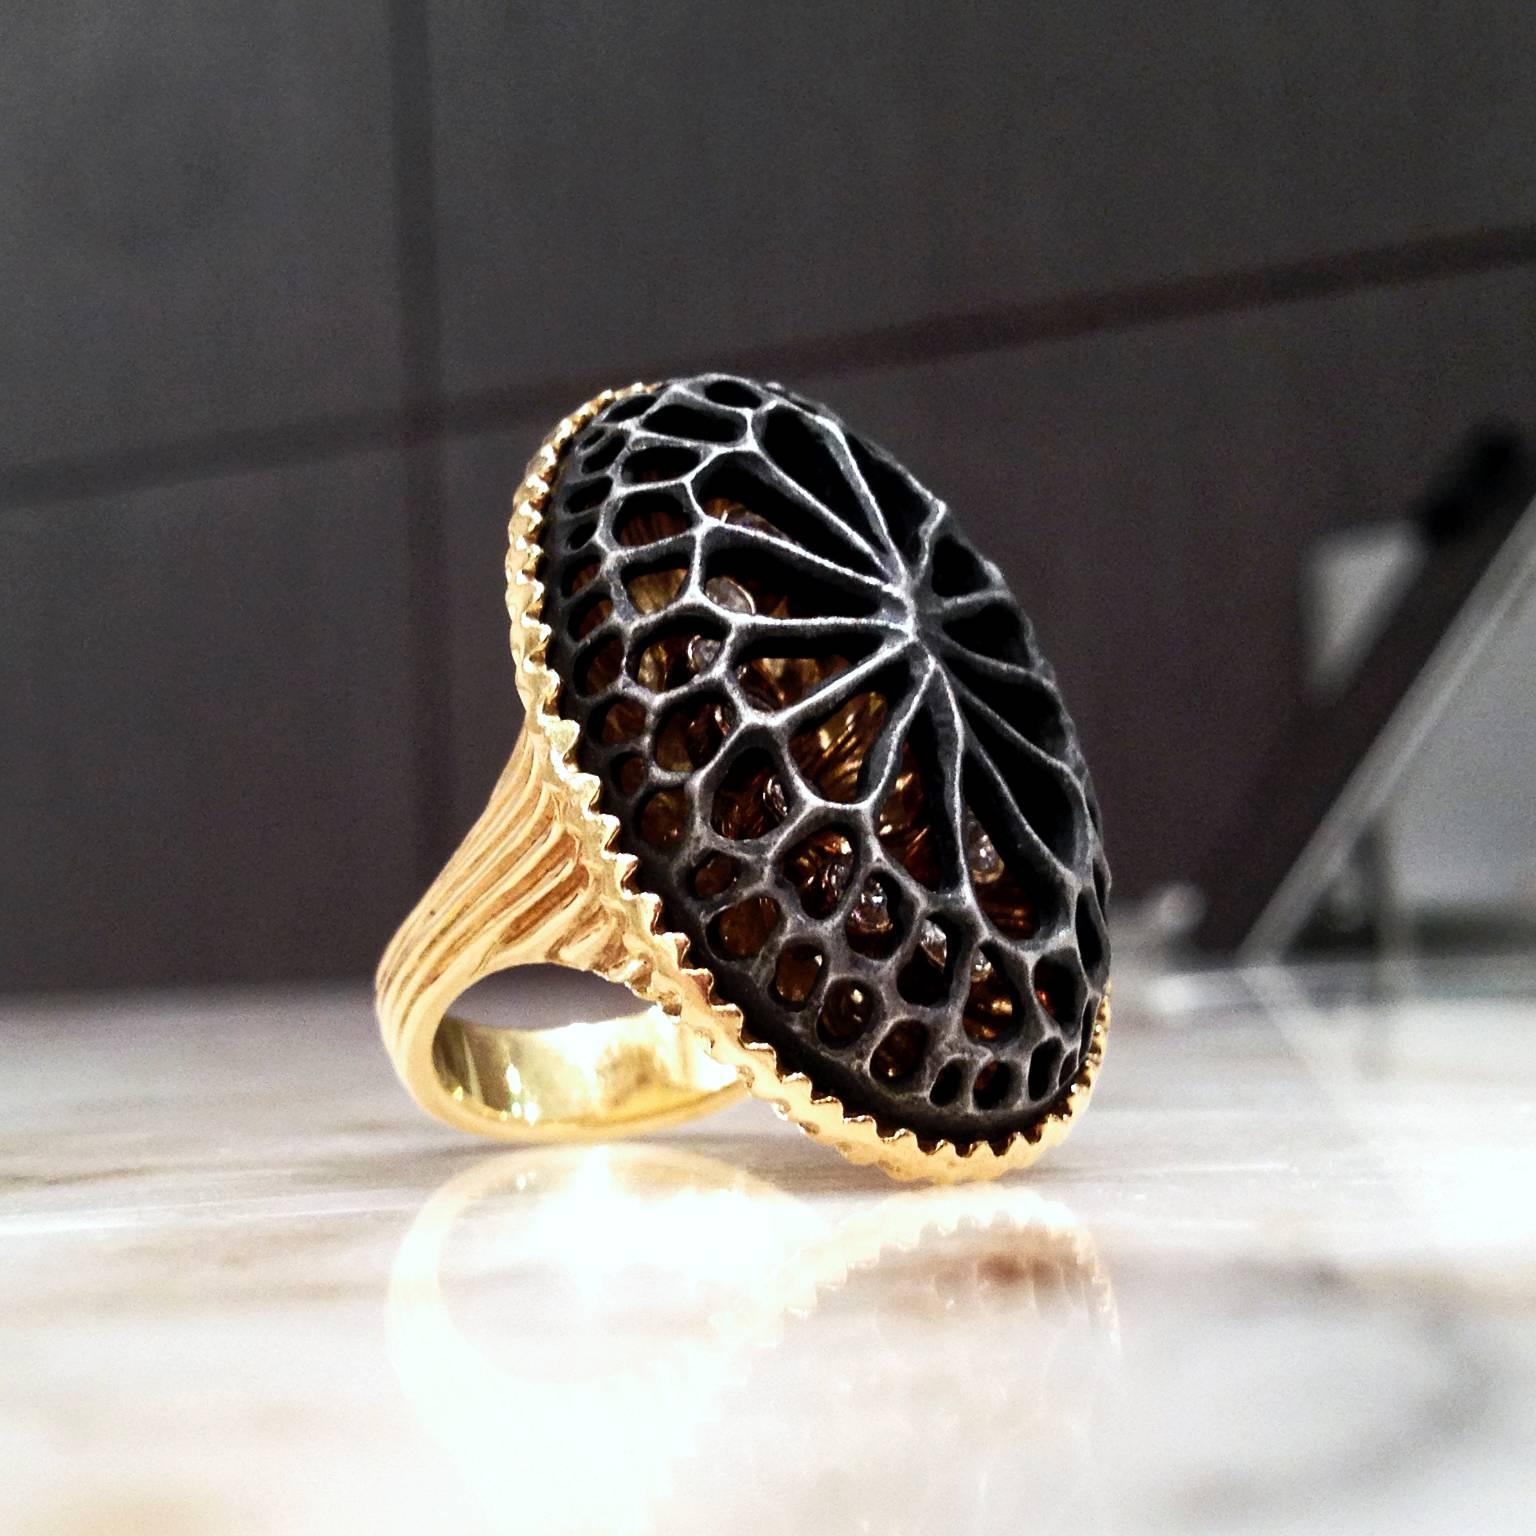 One-of-a-Kind Caged Coral Oval Ring handcrafted in 18k yellow gold with white diamonds totaling 0.82 carats bezel-set under the artist's signature cobalt chrome-finished coral dome.